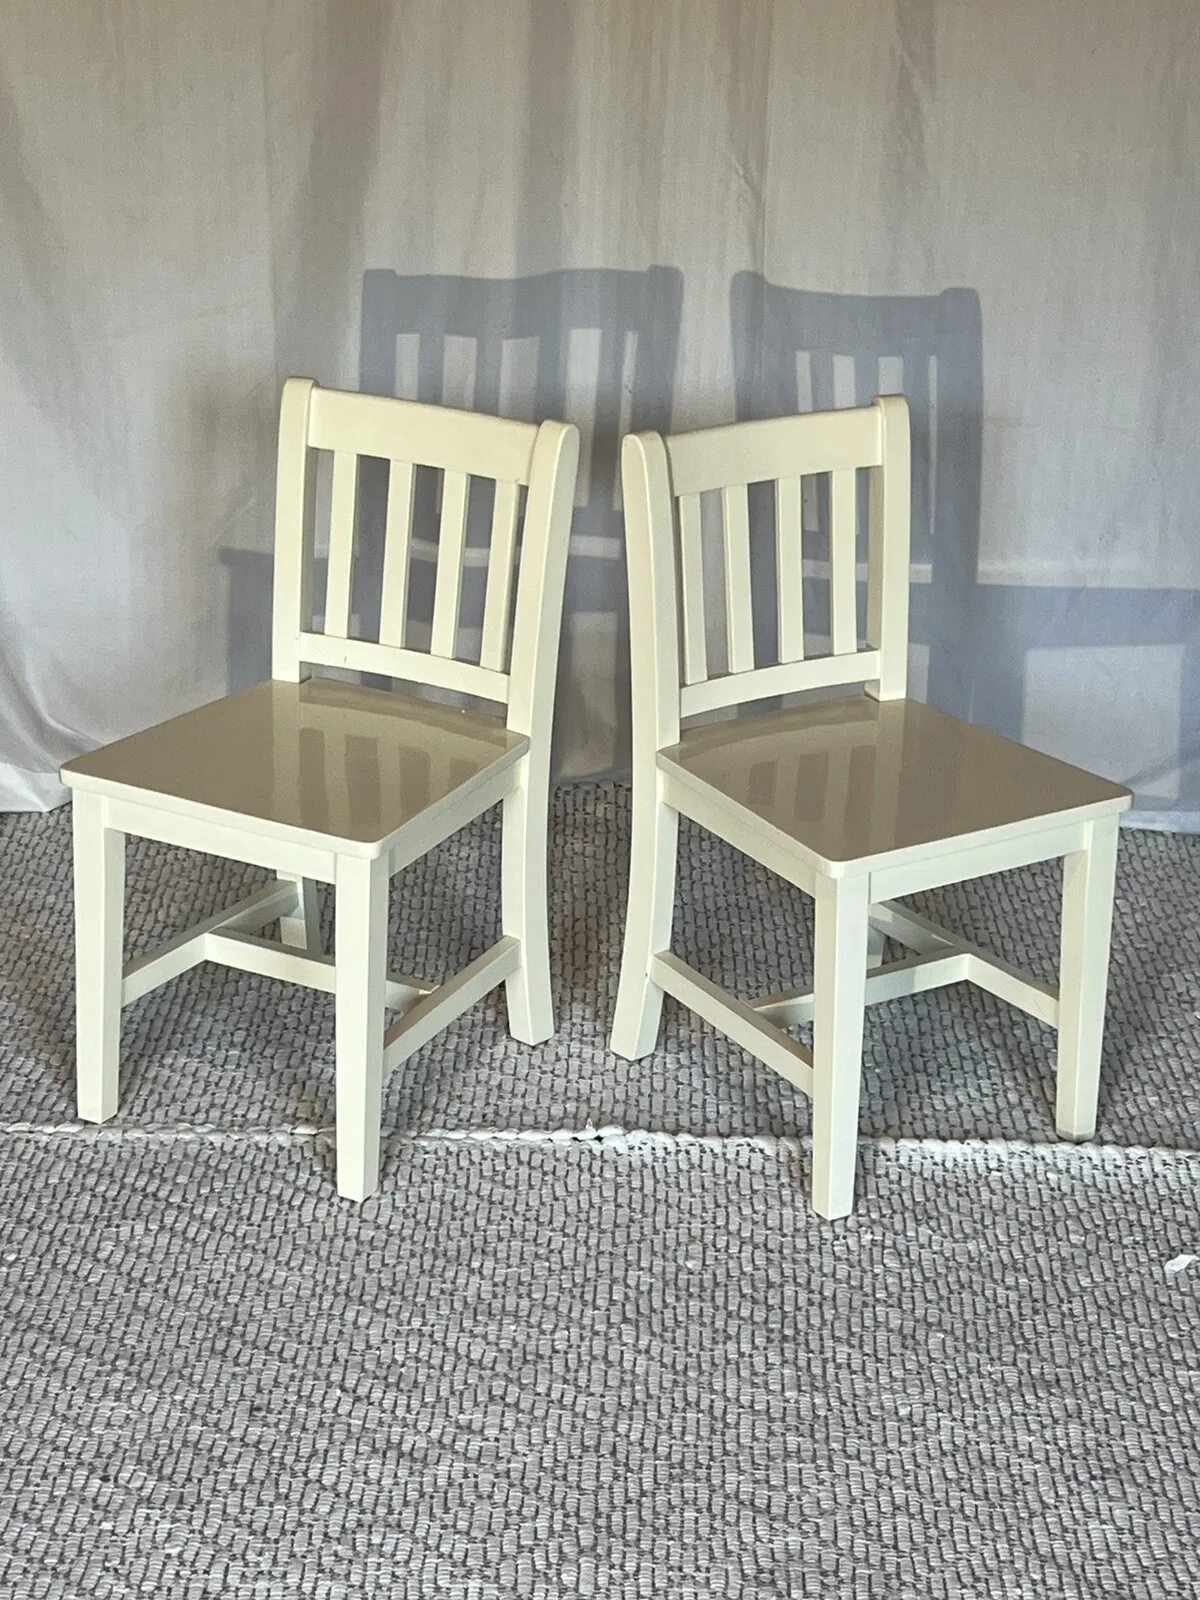 Childrens Wooden Table And Chairs, 2 Pc Set.